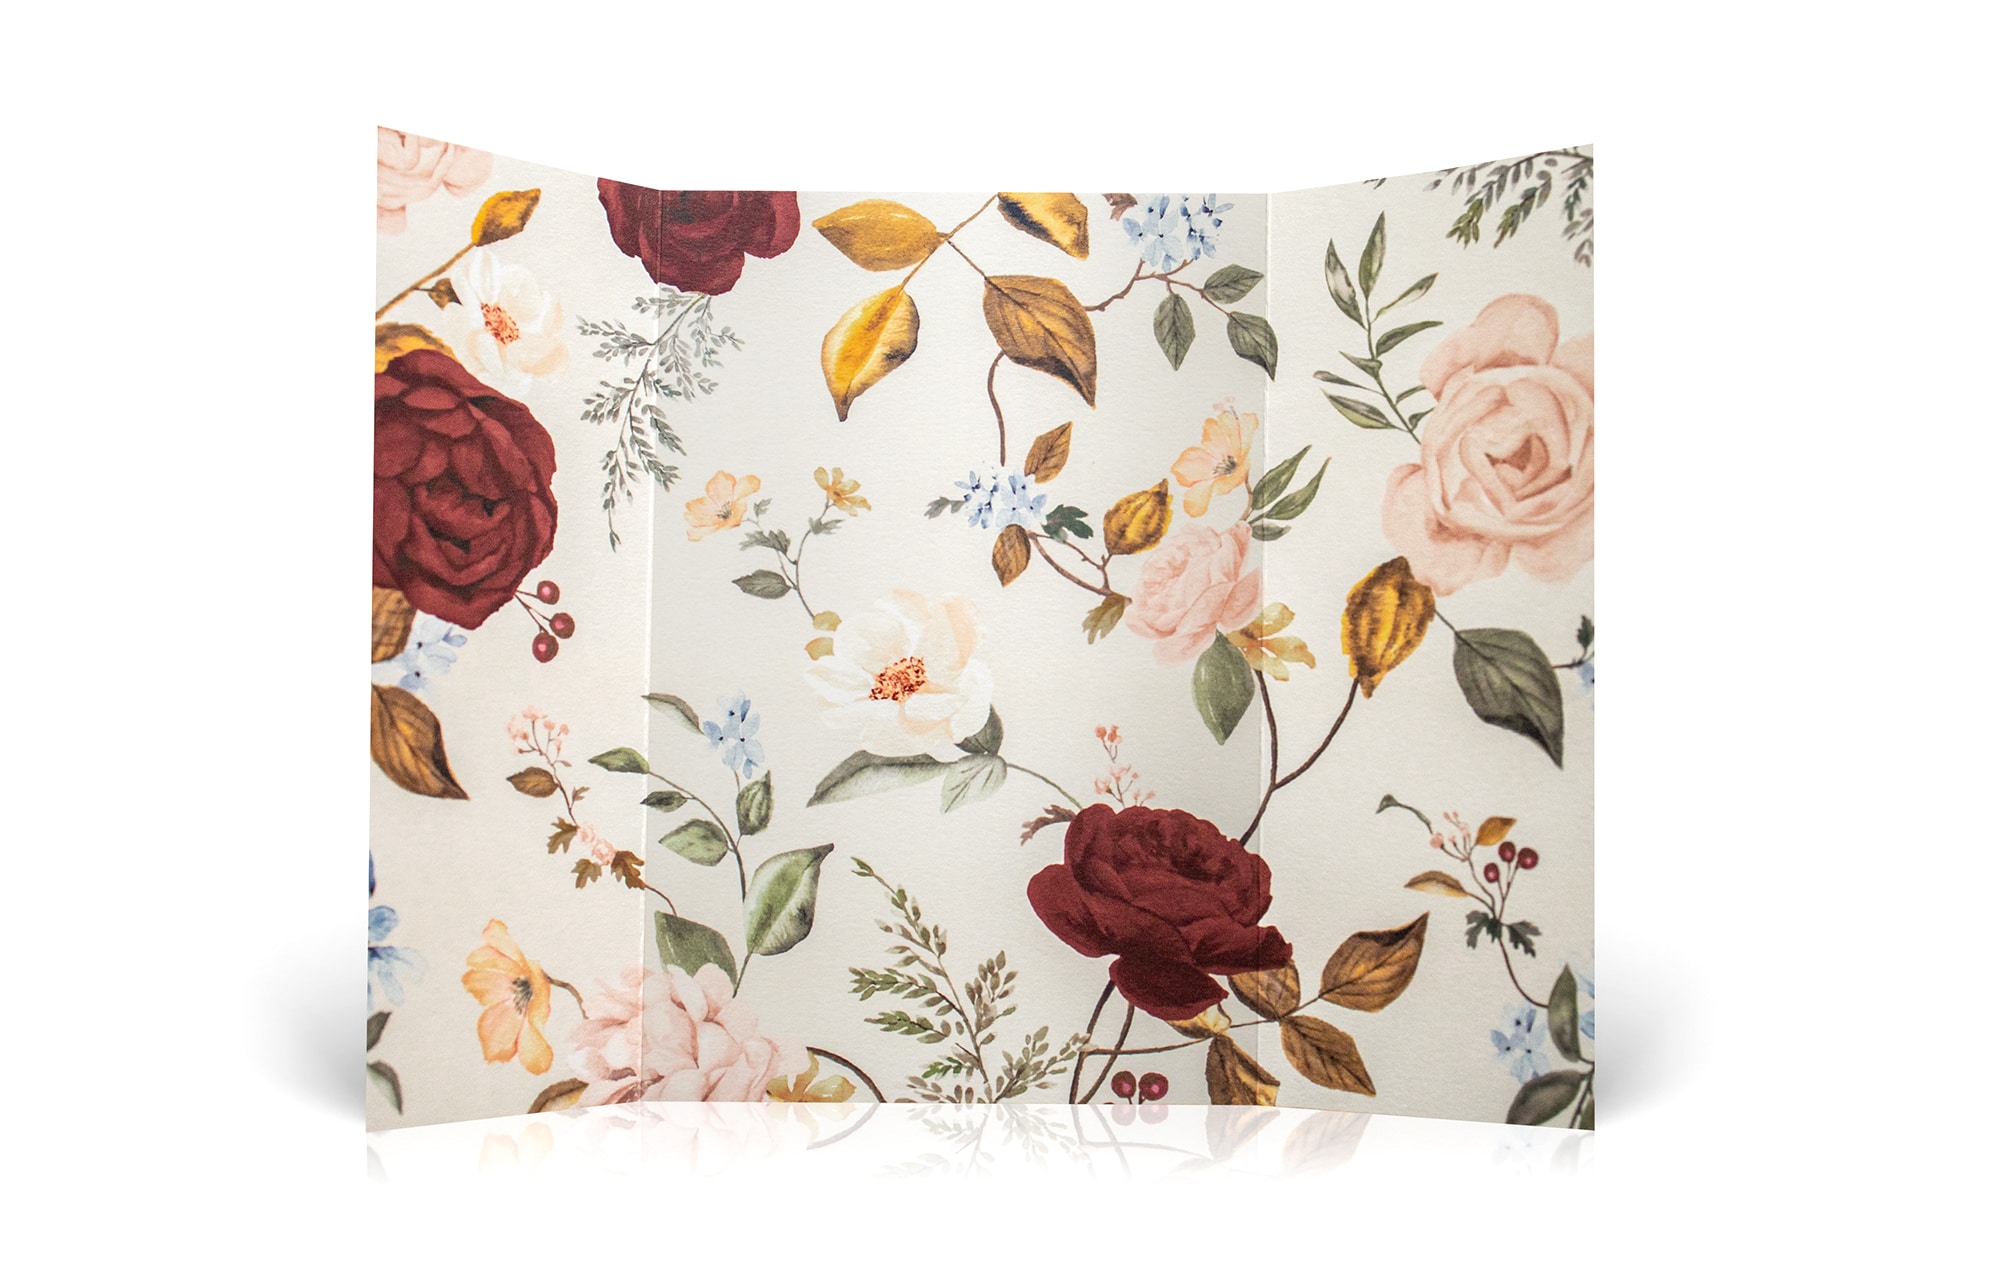 Gatefold wrap with roses